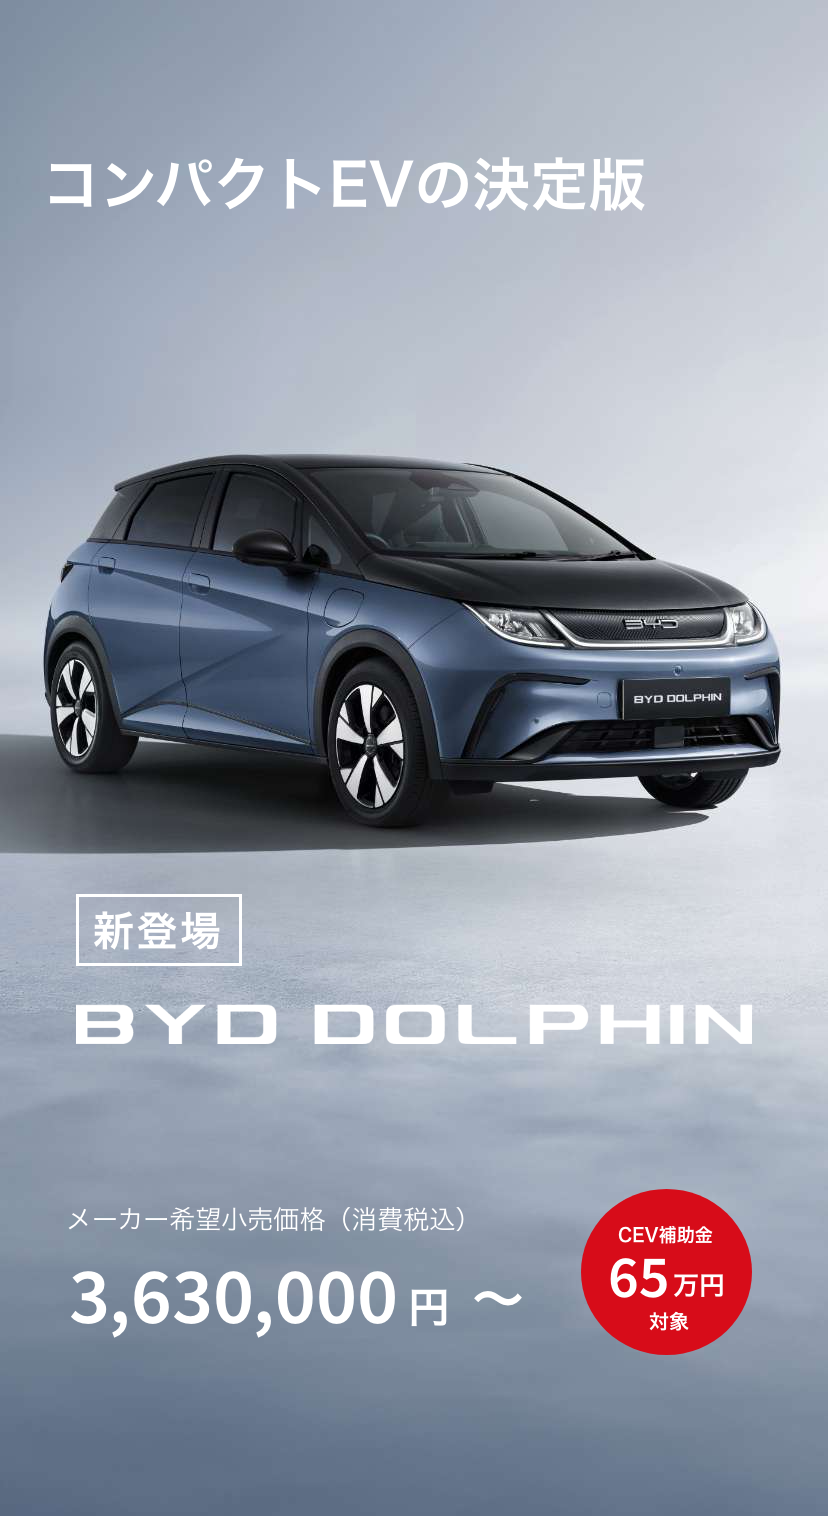 BYD DOLPHIN DEBUT! - BYD AUTO 国立